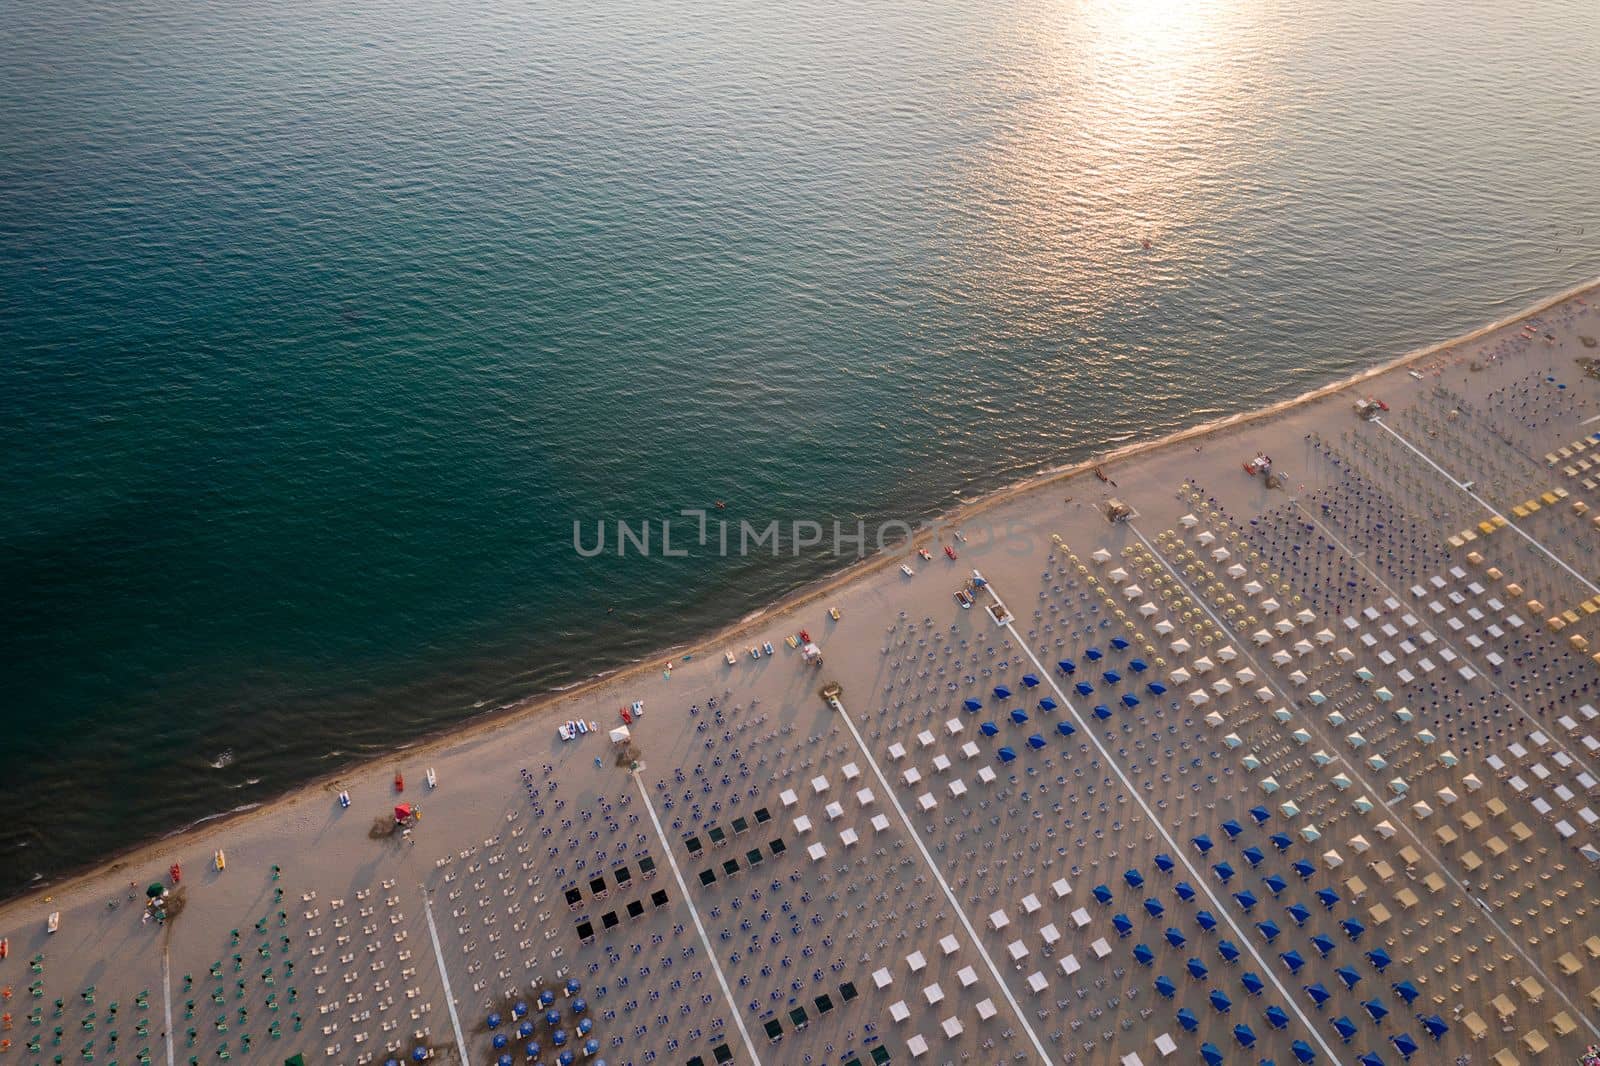 Aerial view of the equipped beach of Viareggio Tuscany photographed in the late afternoon 